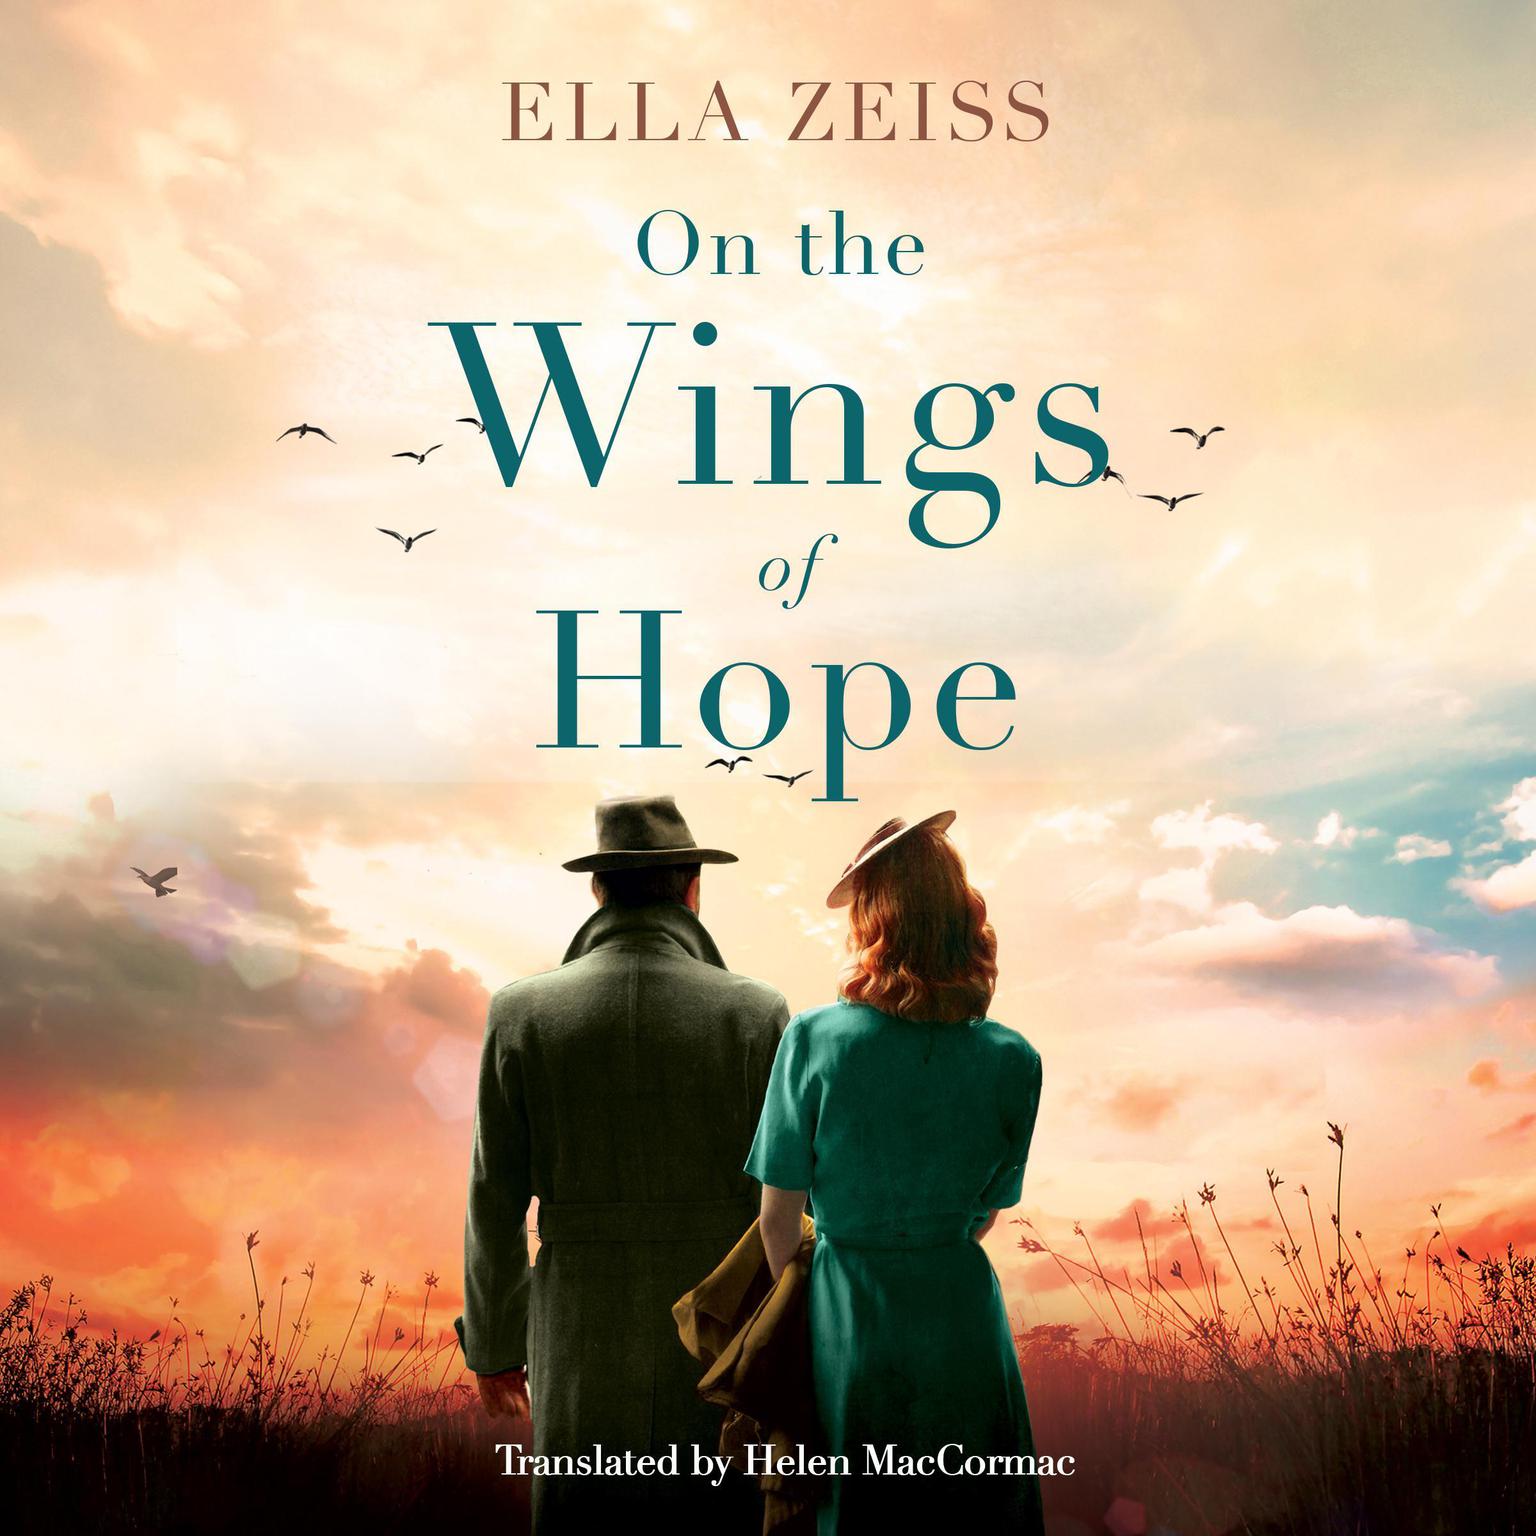 On the Wings of Hope Audiobook, by Ella Zeiss